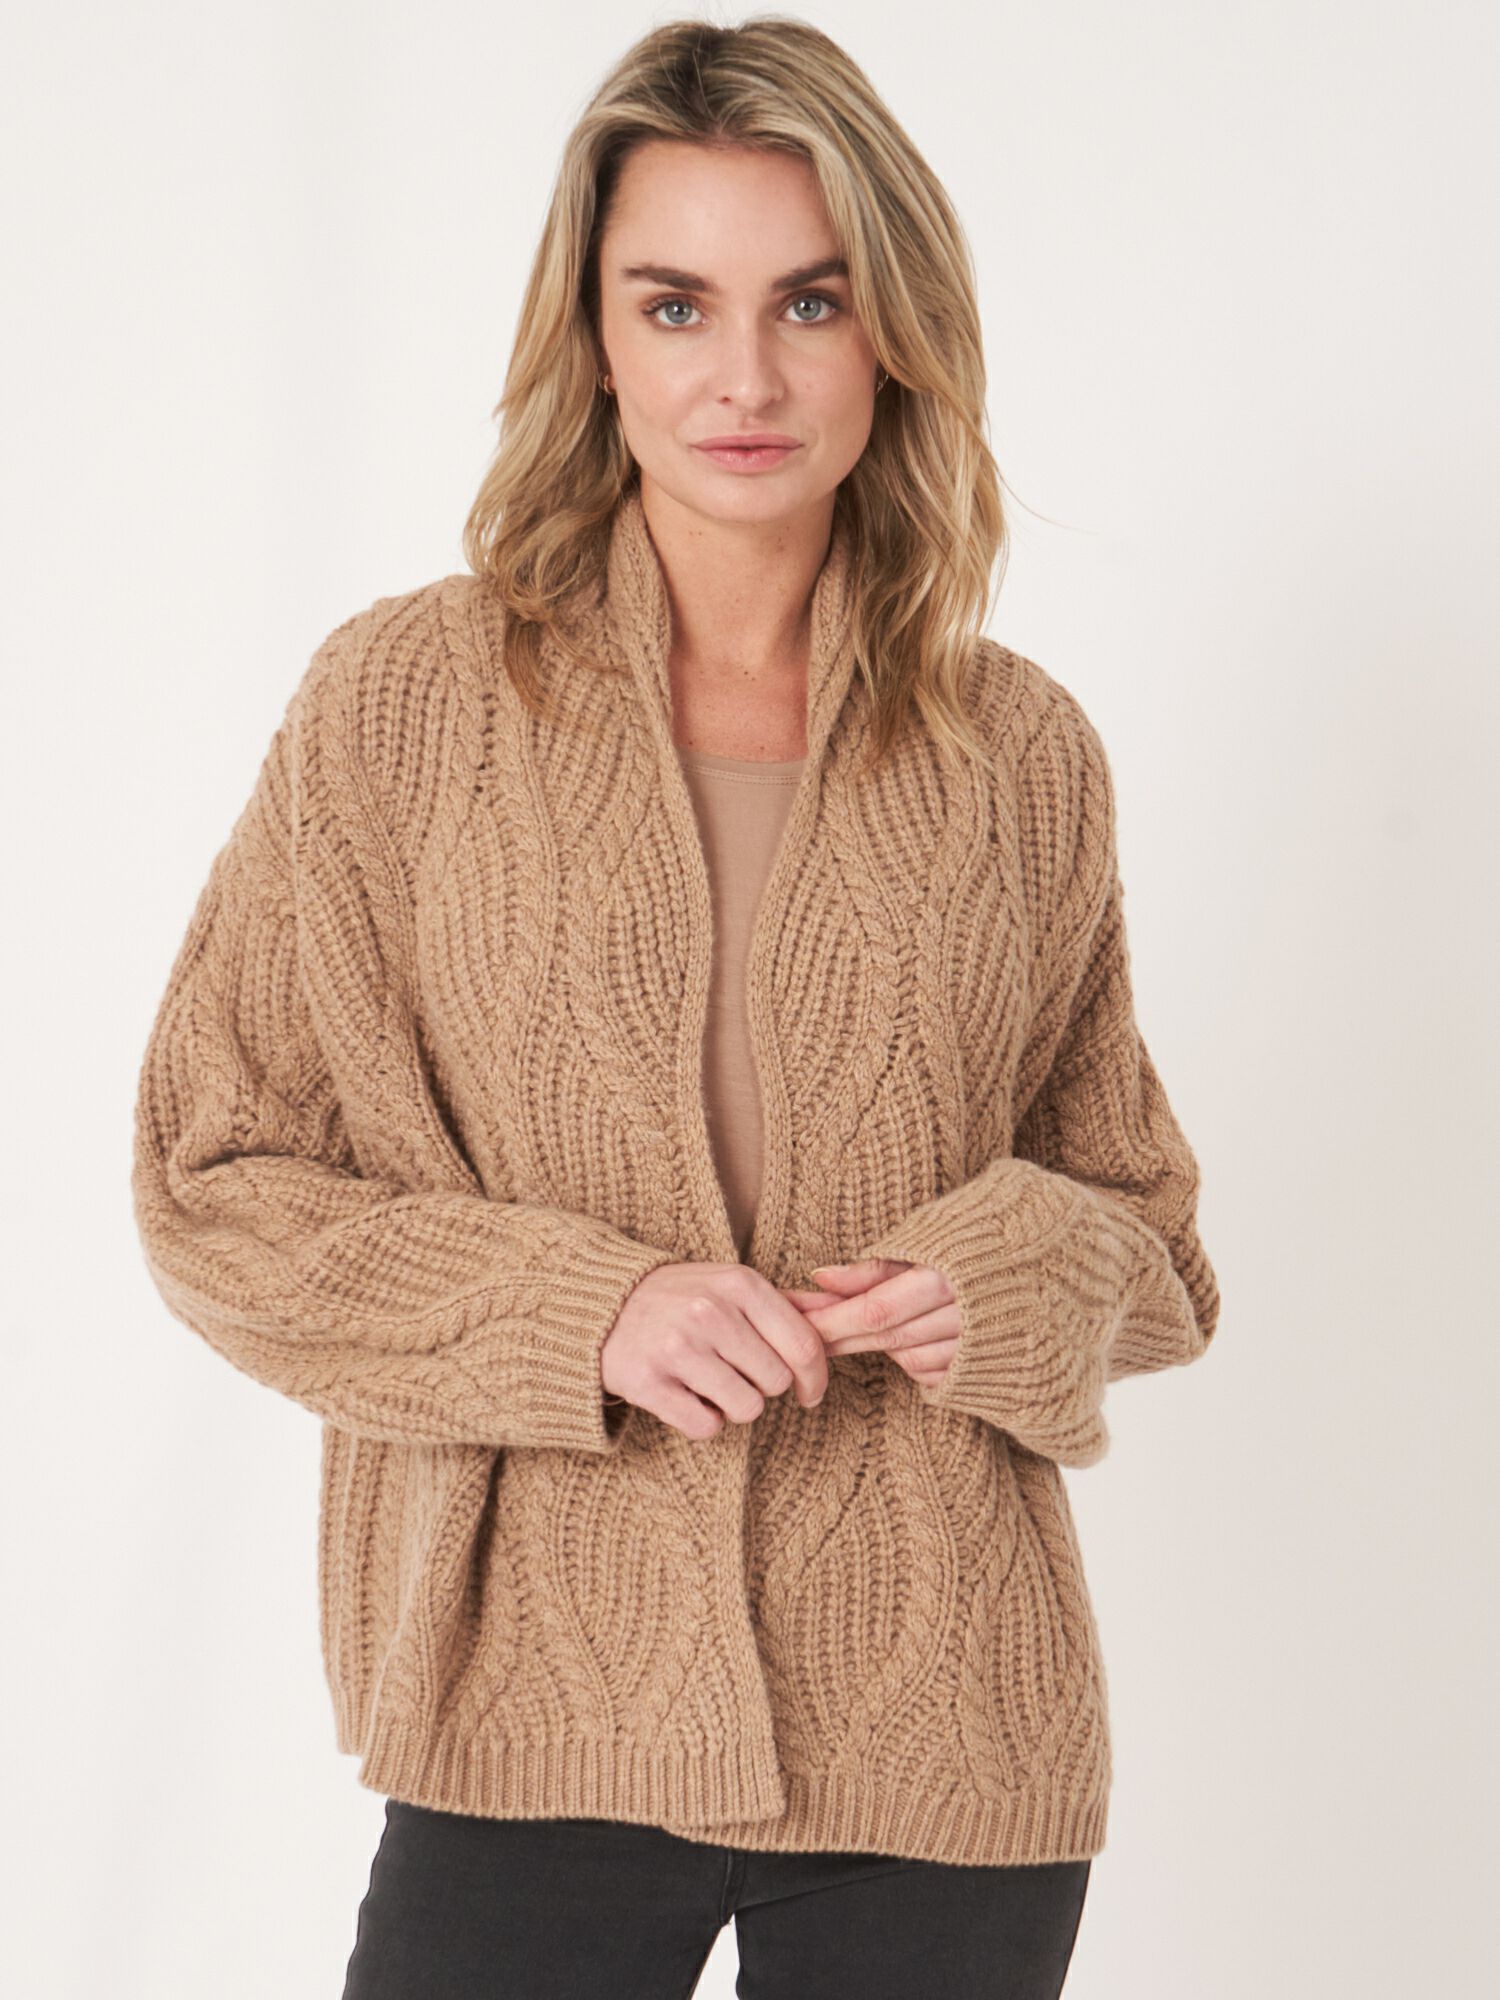 Women's Chunky cashmere cable knit cardigan with scalloped hem